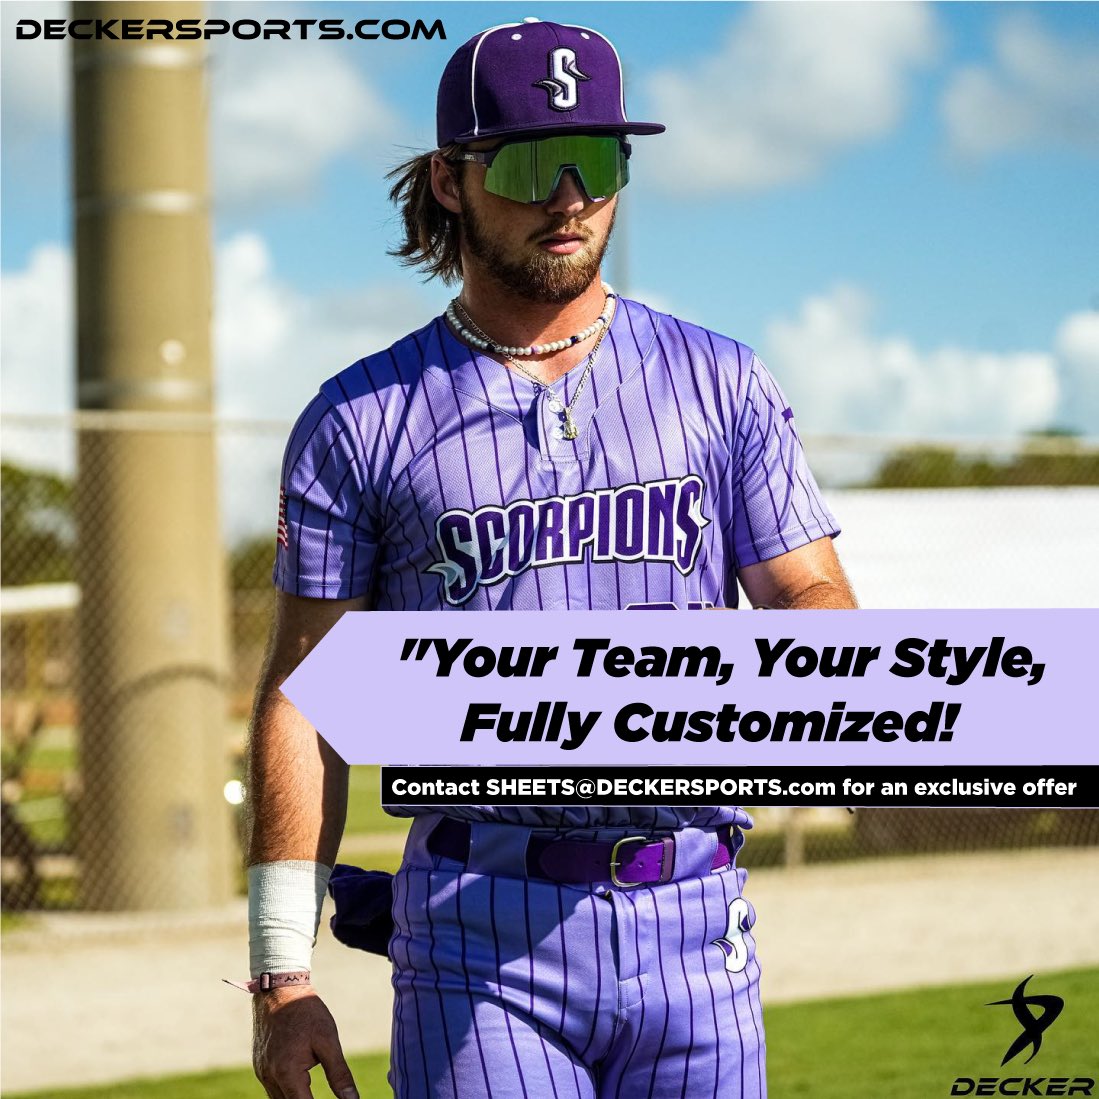 COACHES: Looking for new custom uniforms, BP tops, training shirts & shorts… here’s a solution! Reach out to the @decker_sports crew! Use the code SHEETS2024 or send an email directly to me to get your group in touch with the right folks! 📧 : Sheets@deckersports.com